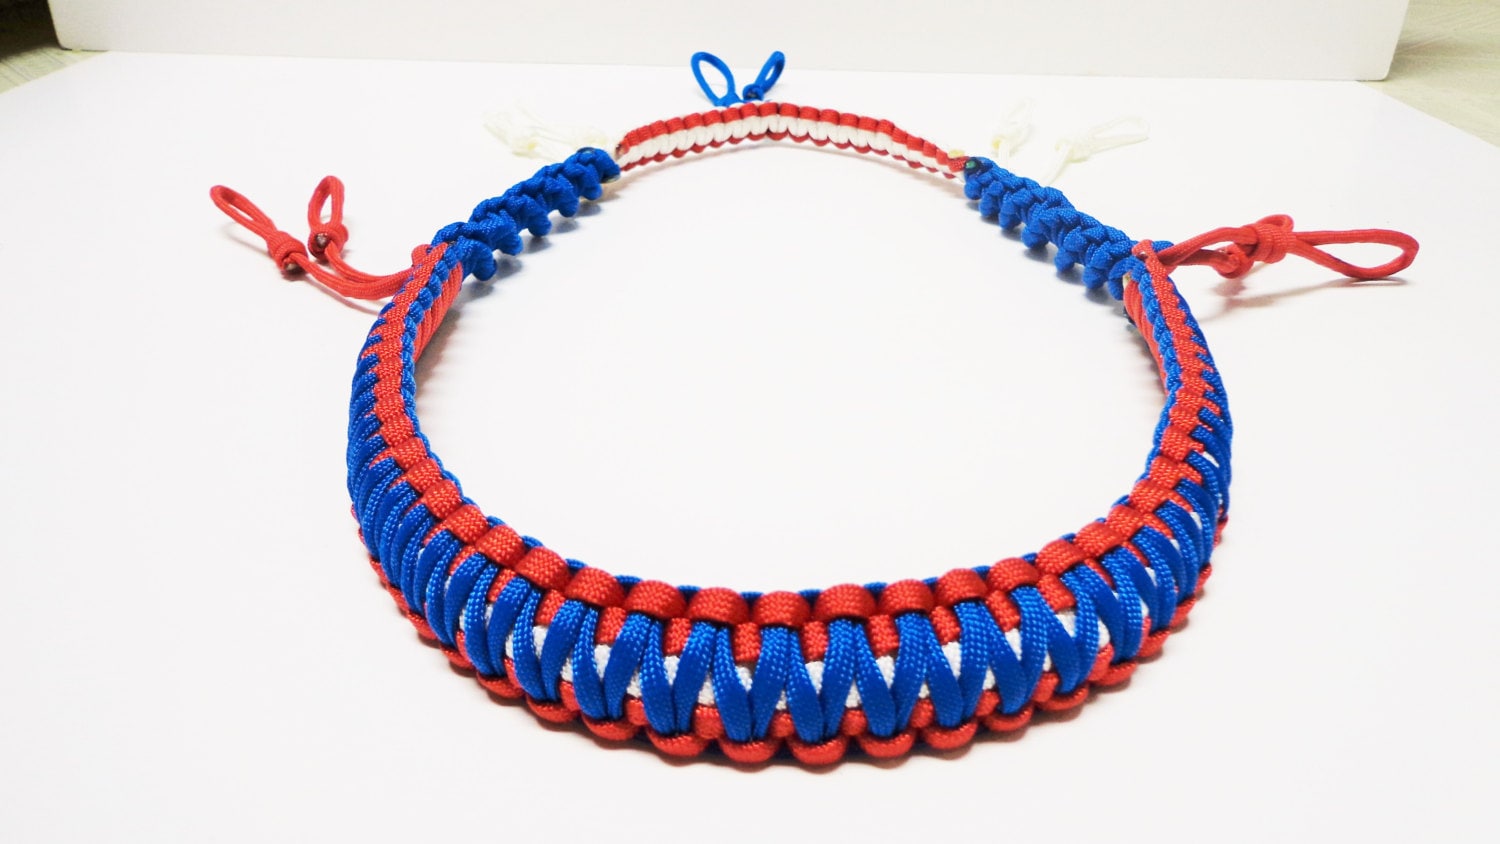 Set of 3 Red White Navy Paracord Lanyards With Glow Ends and